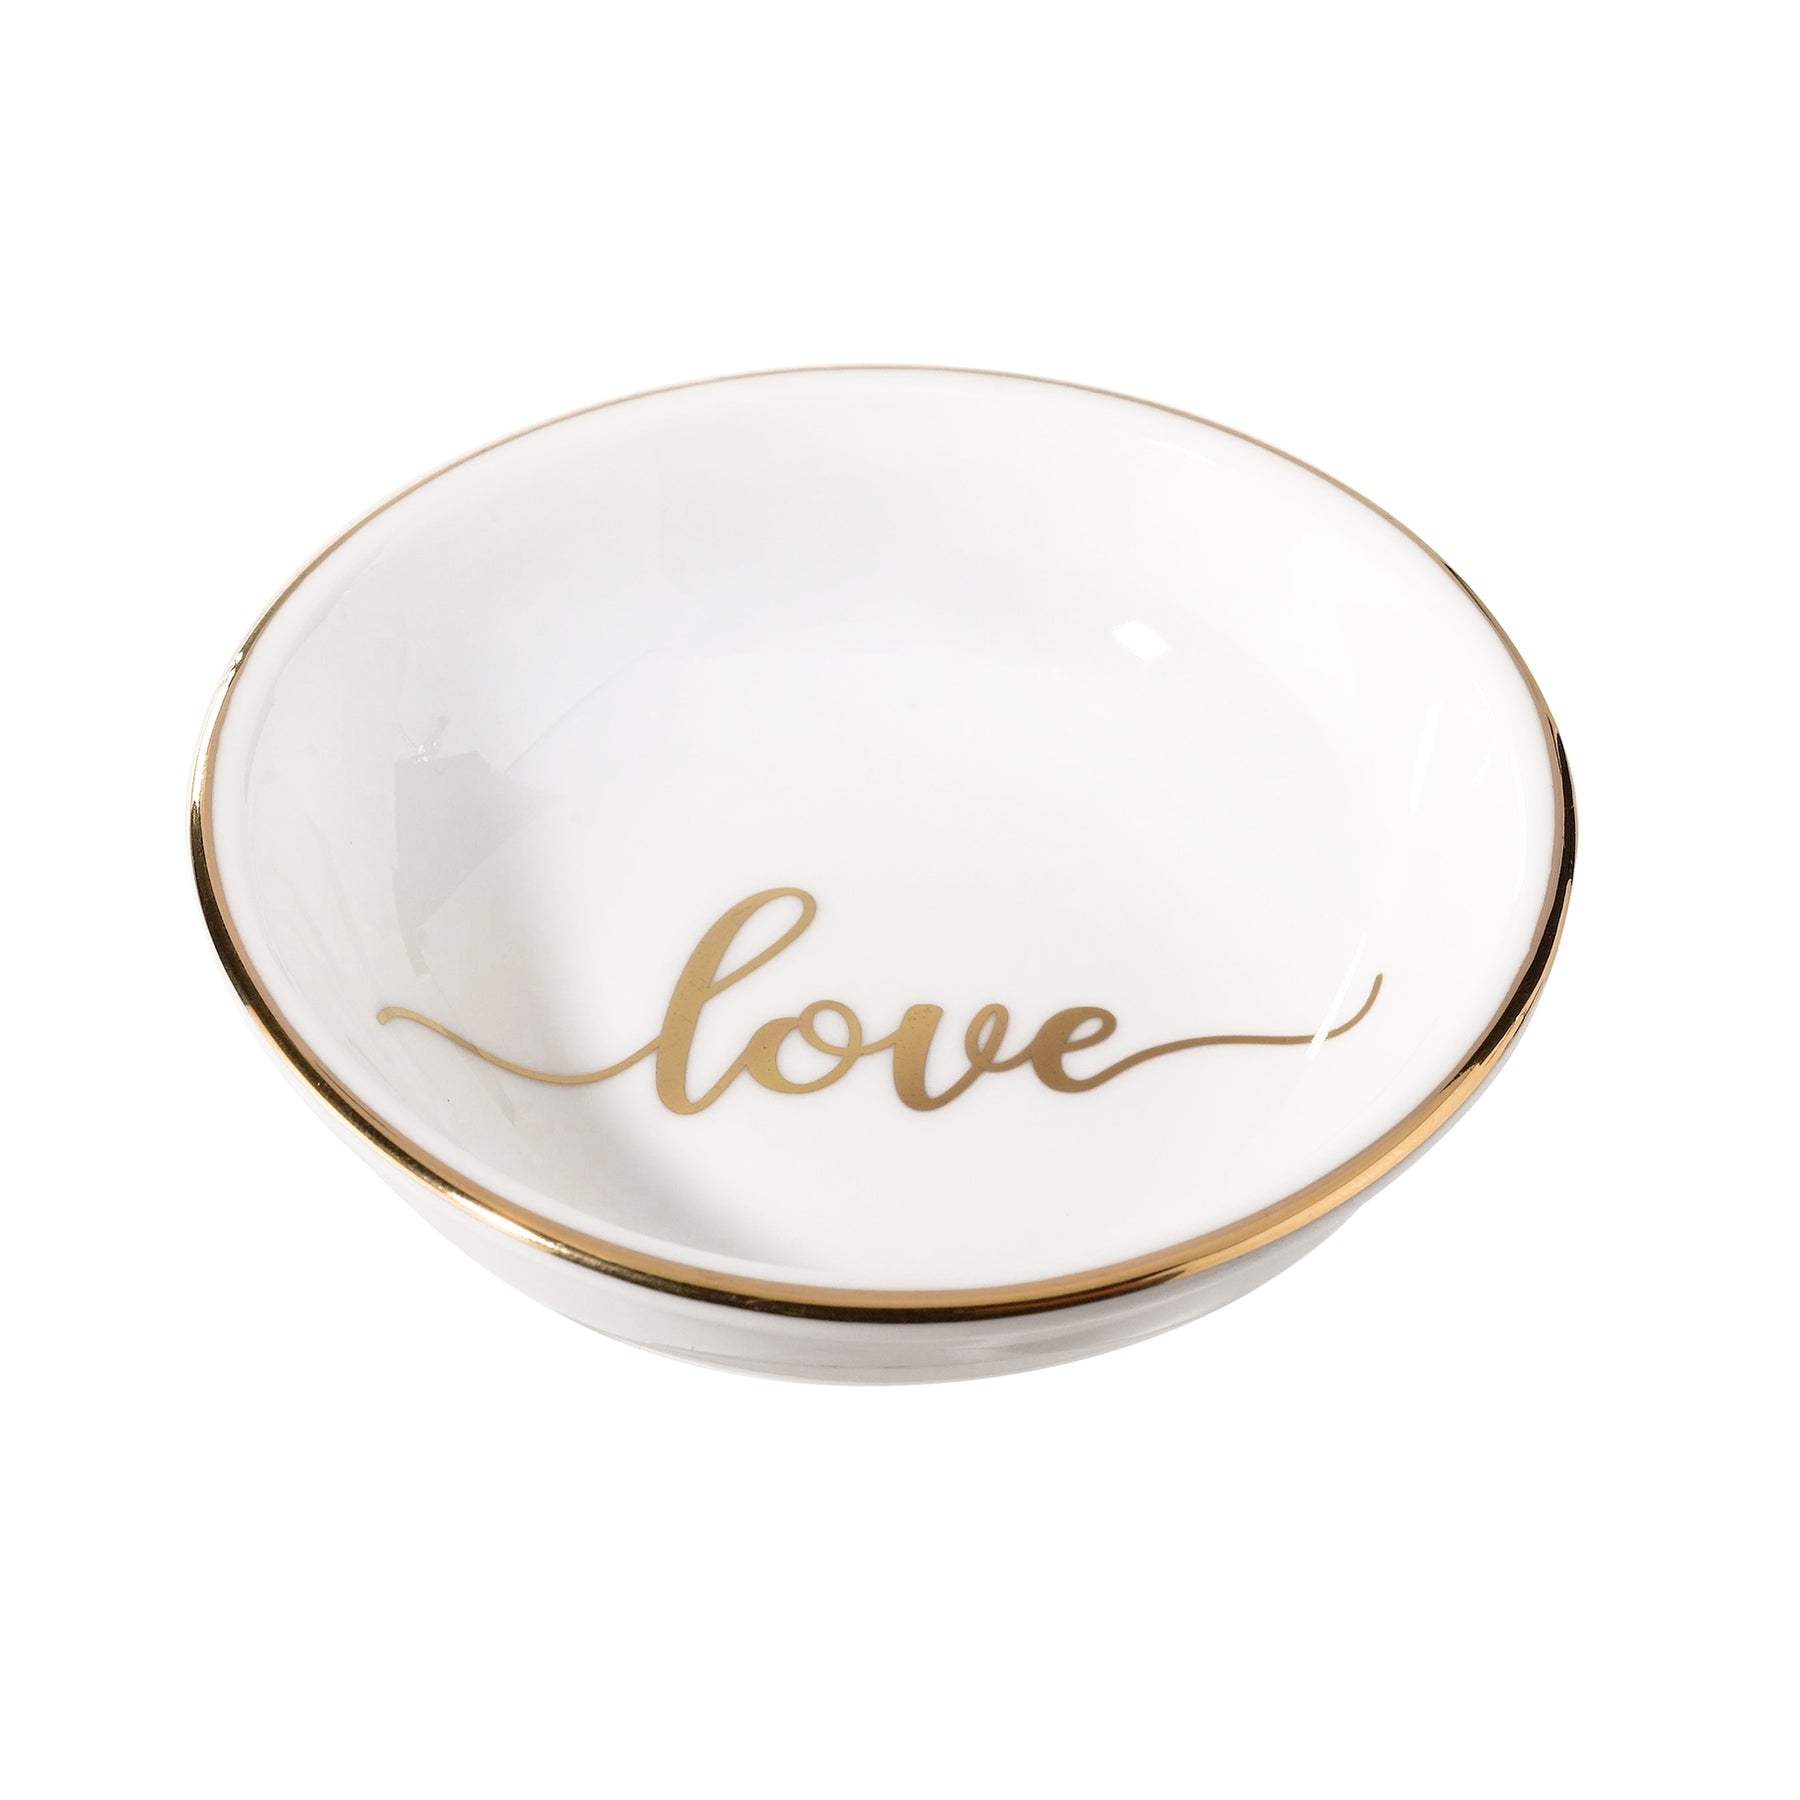 LOVE CERAMIC RING DISH | Wedding Ring Dish for one or two rings - Minter and Richter Designs